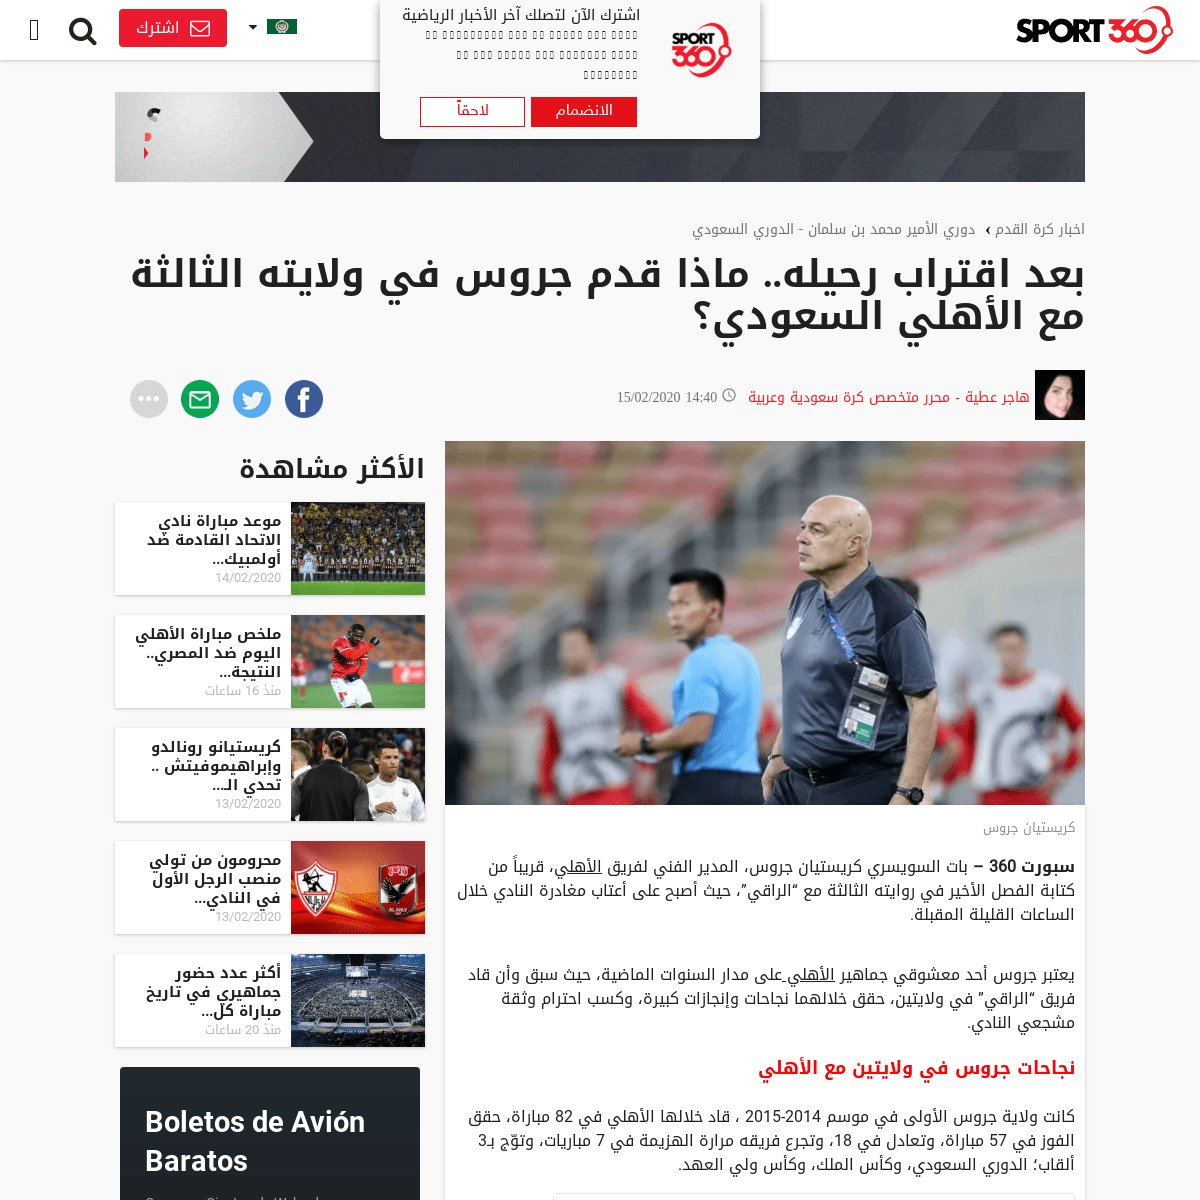 A complete backup of arabic.sport360.com/article/football/%D9%83%D8%B1%D8%A9-%D8%B3%D8%B9%D9%88%D8%AF%D9%8A%D8%A9/904677/%D8%A8%